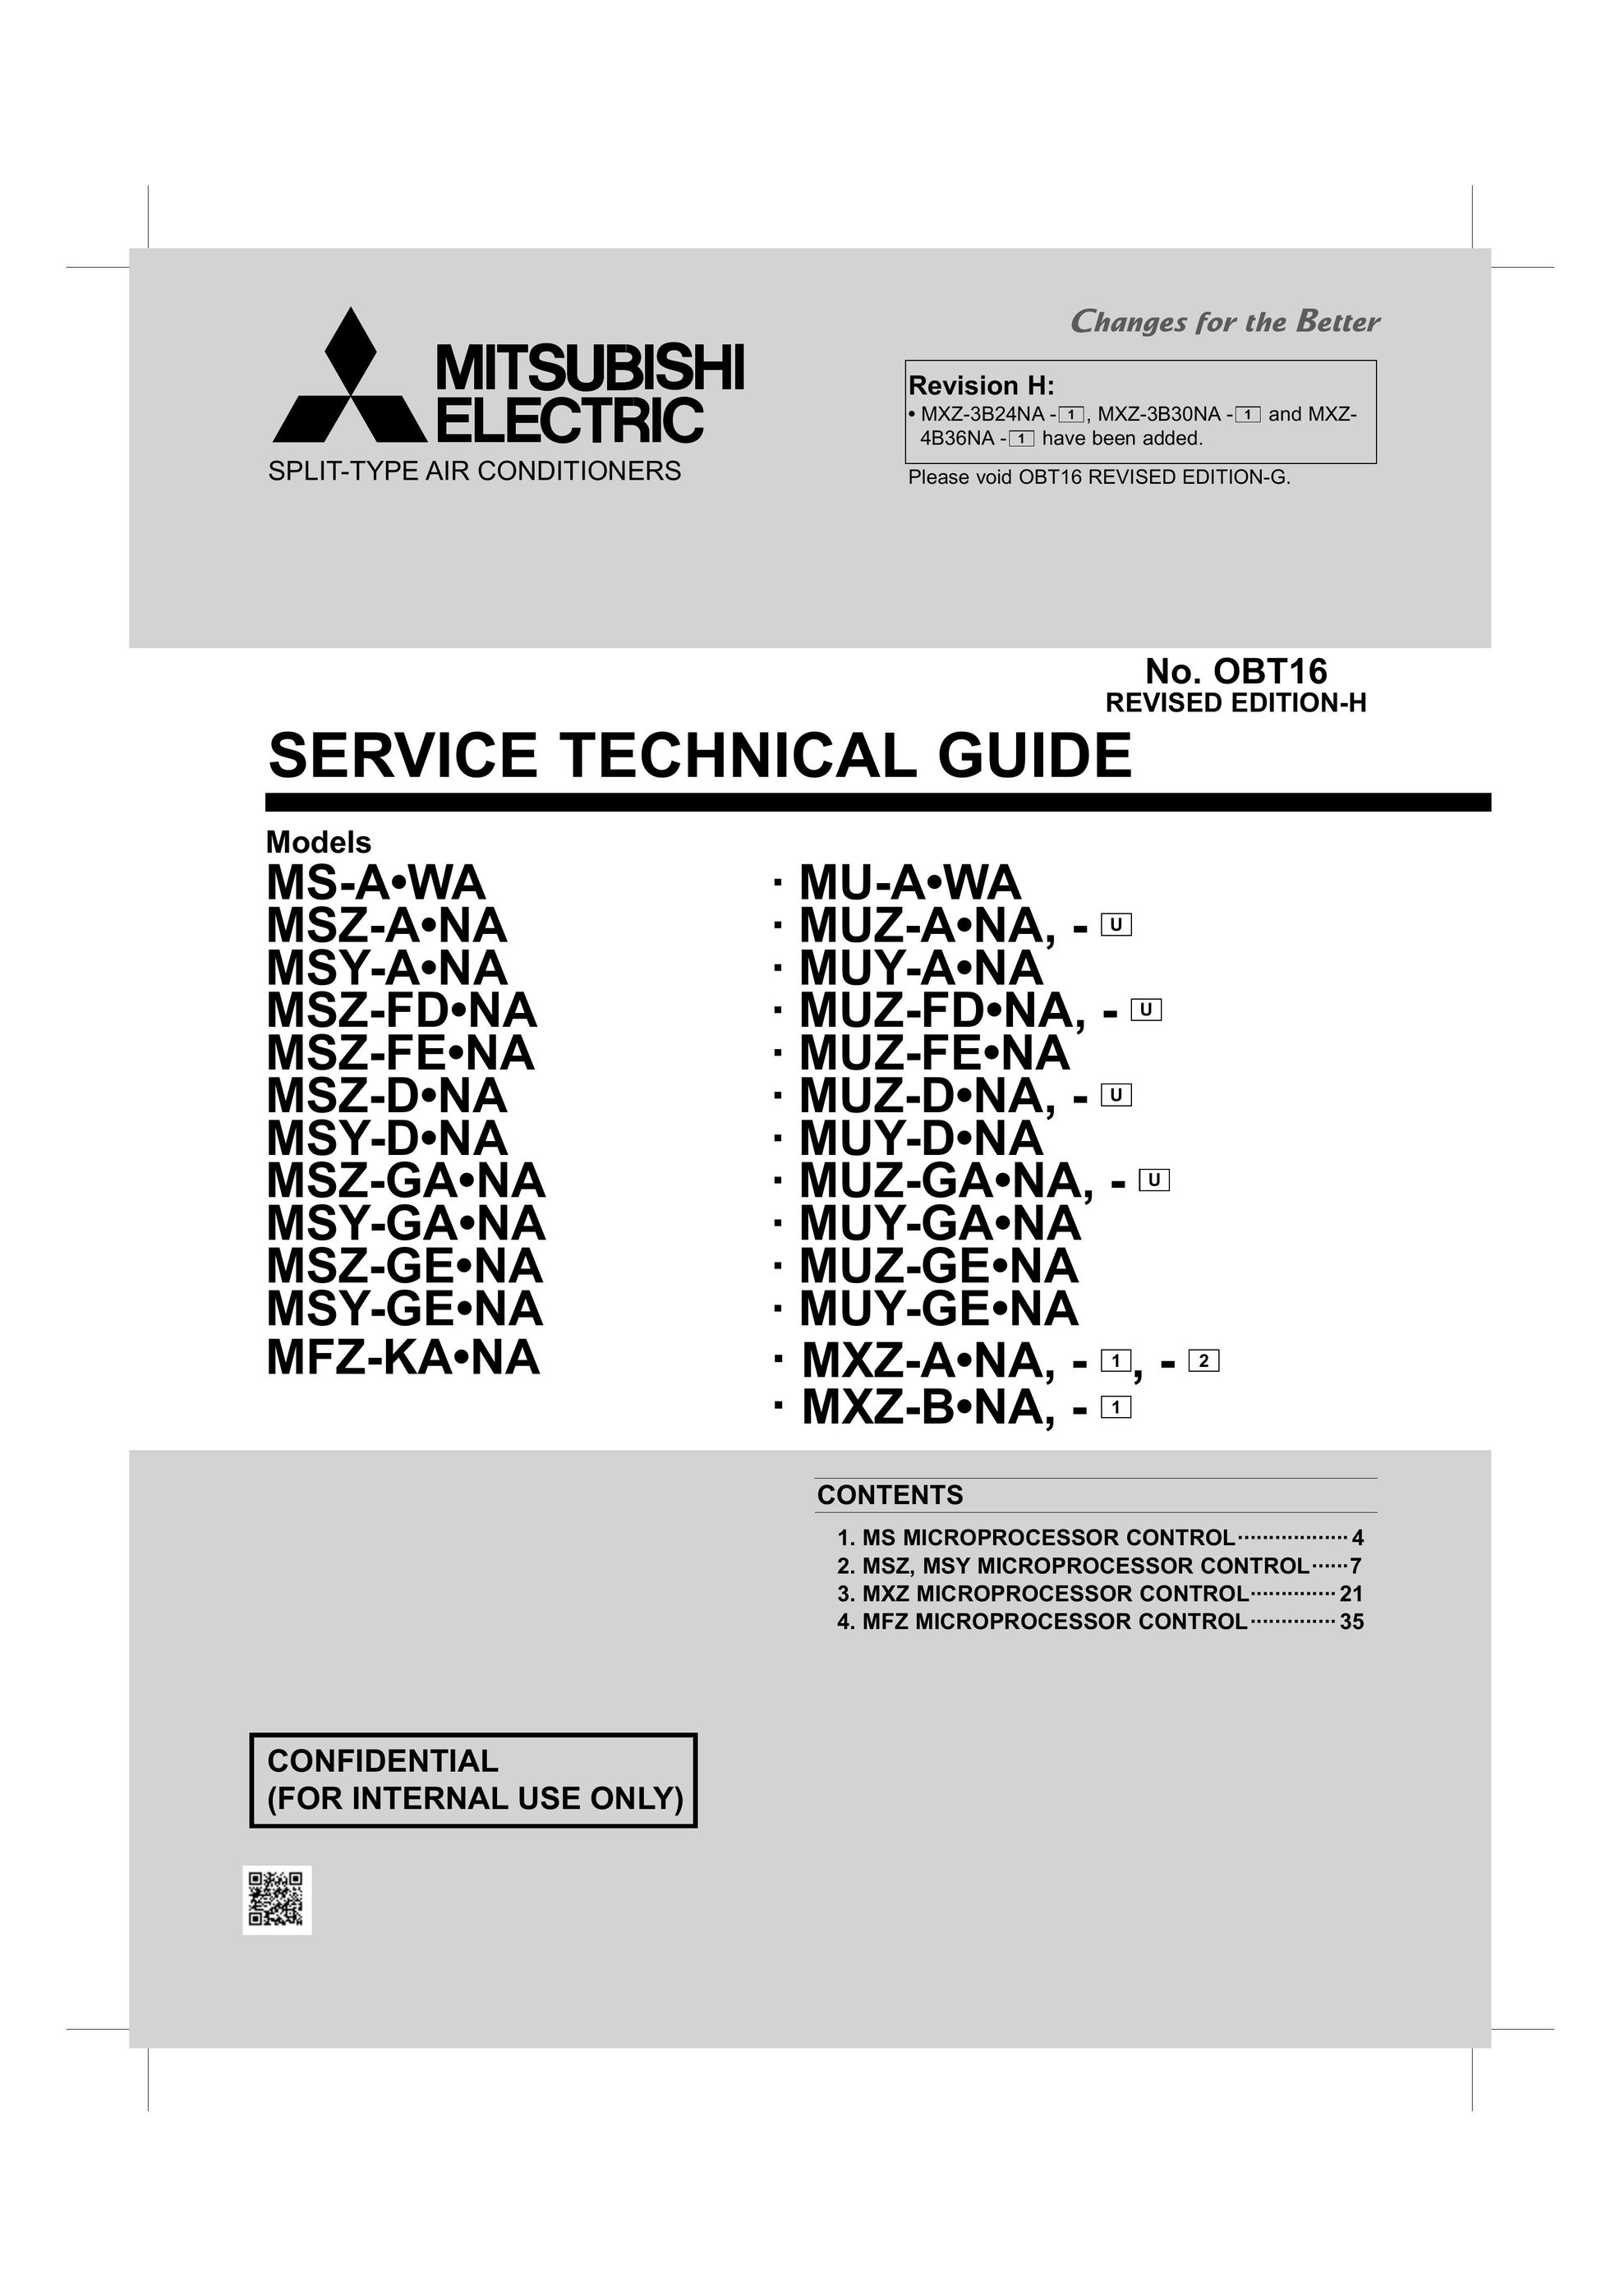 Mitsumi electronic MSZ-DNA Air Conditioner User Manual